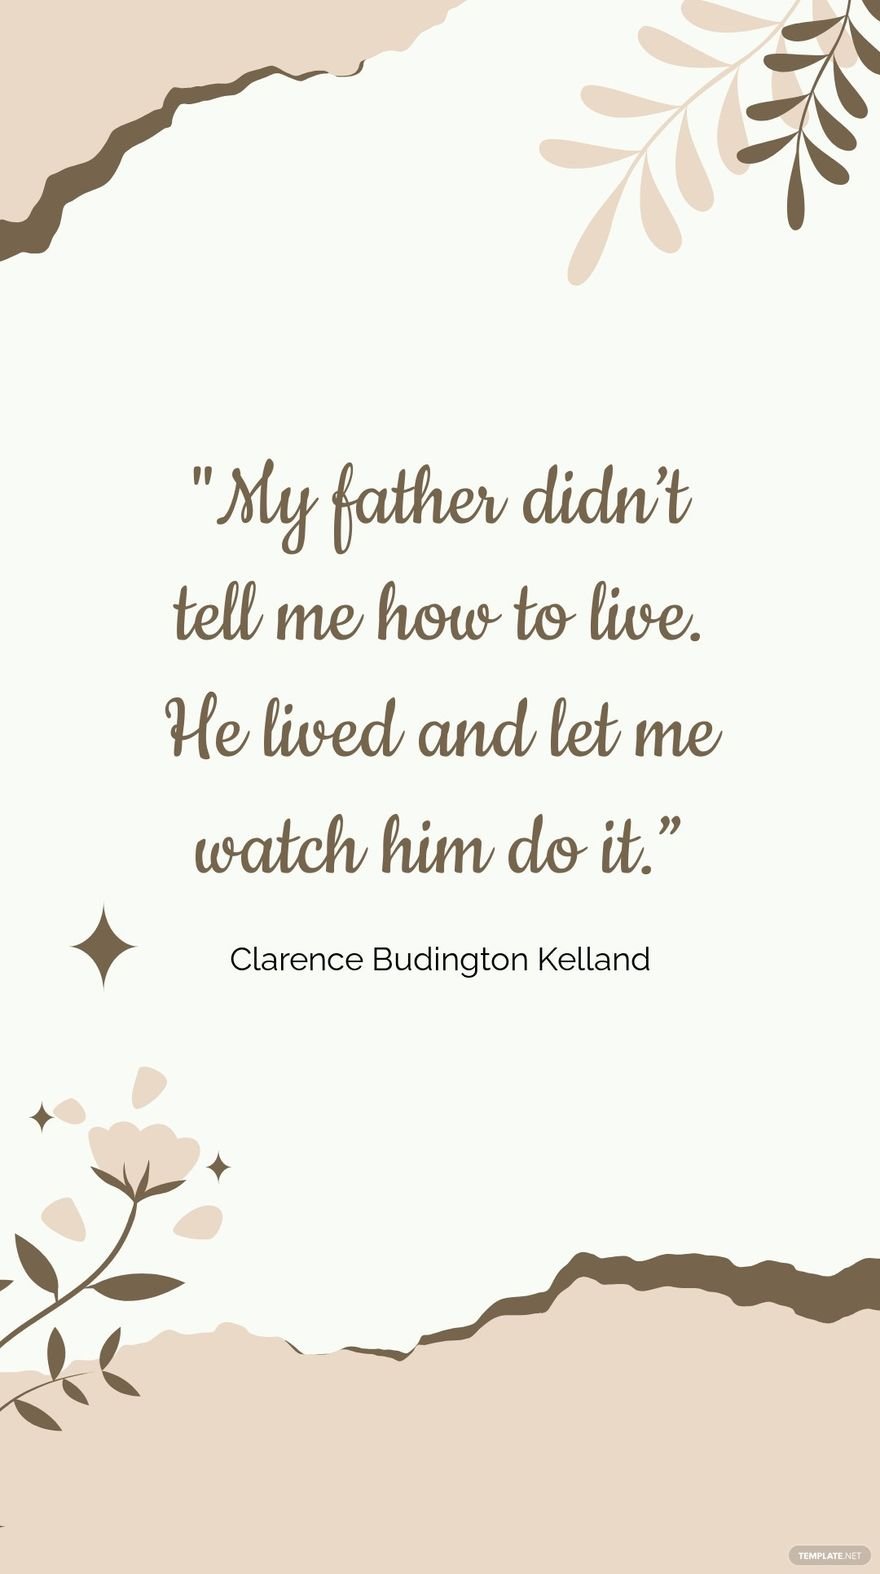 Clarence Budington Kelland - "My father didn’t tell me how to live. He lived and let me watch him do it.” in JPG